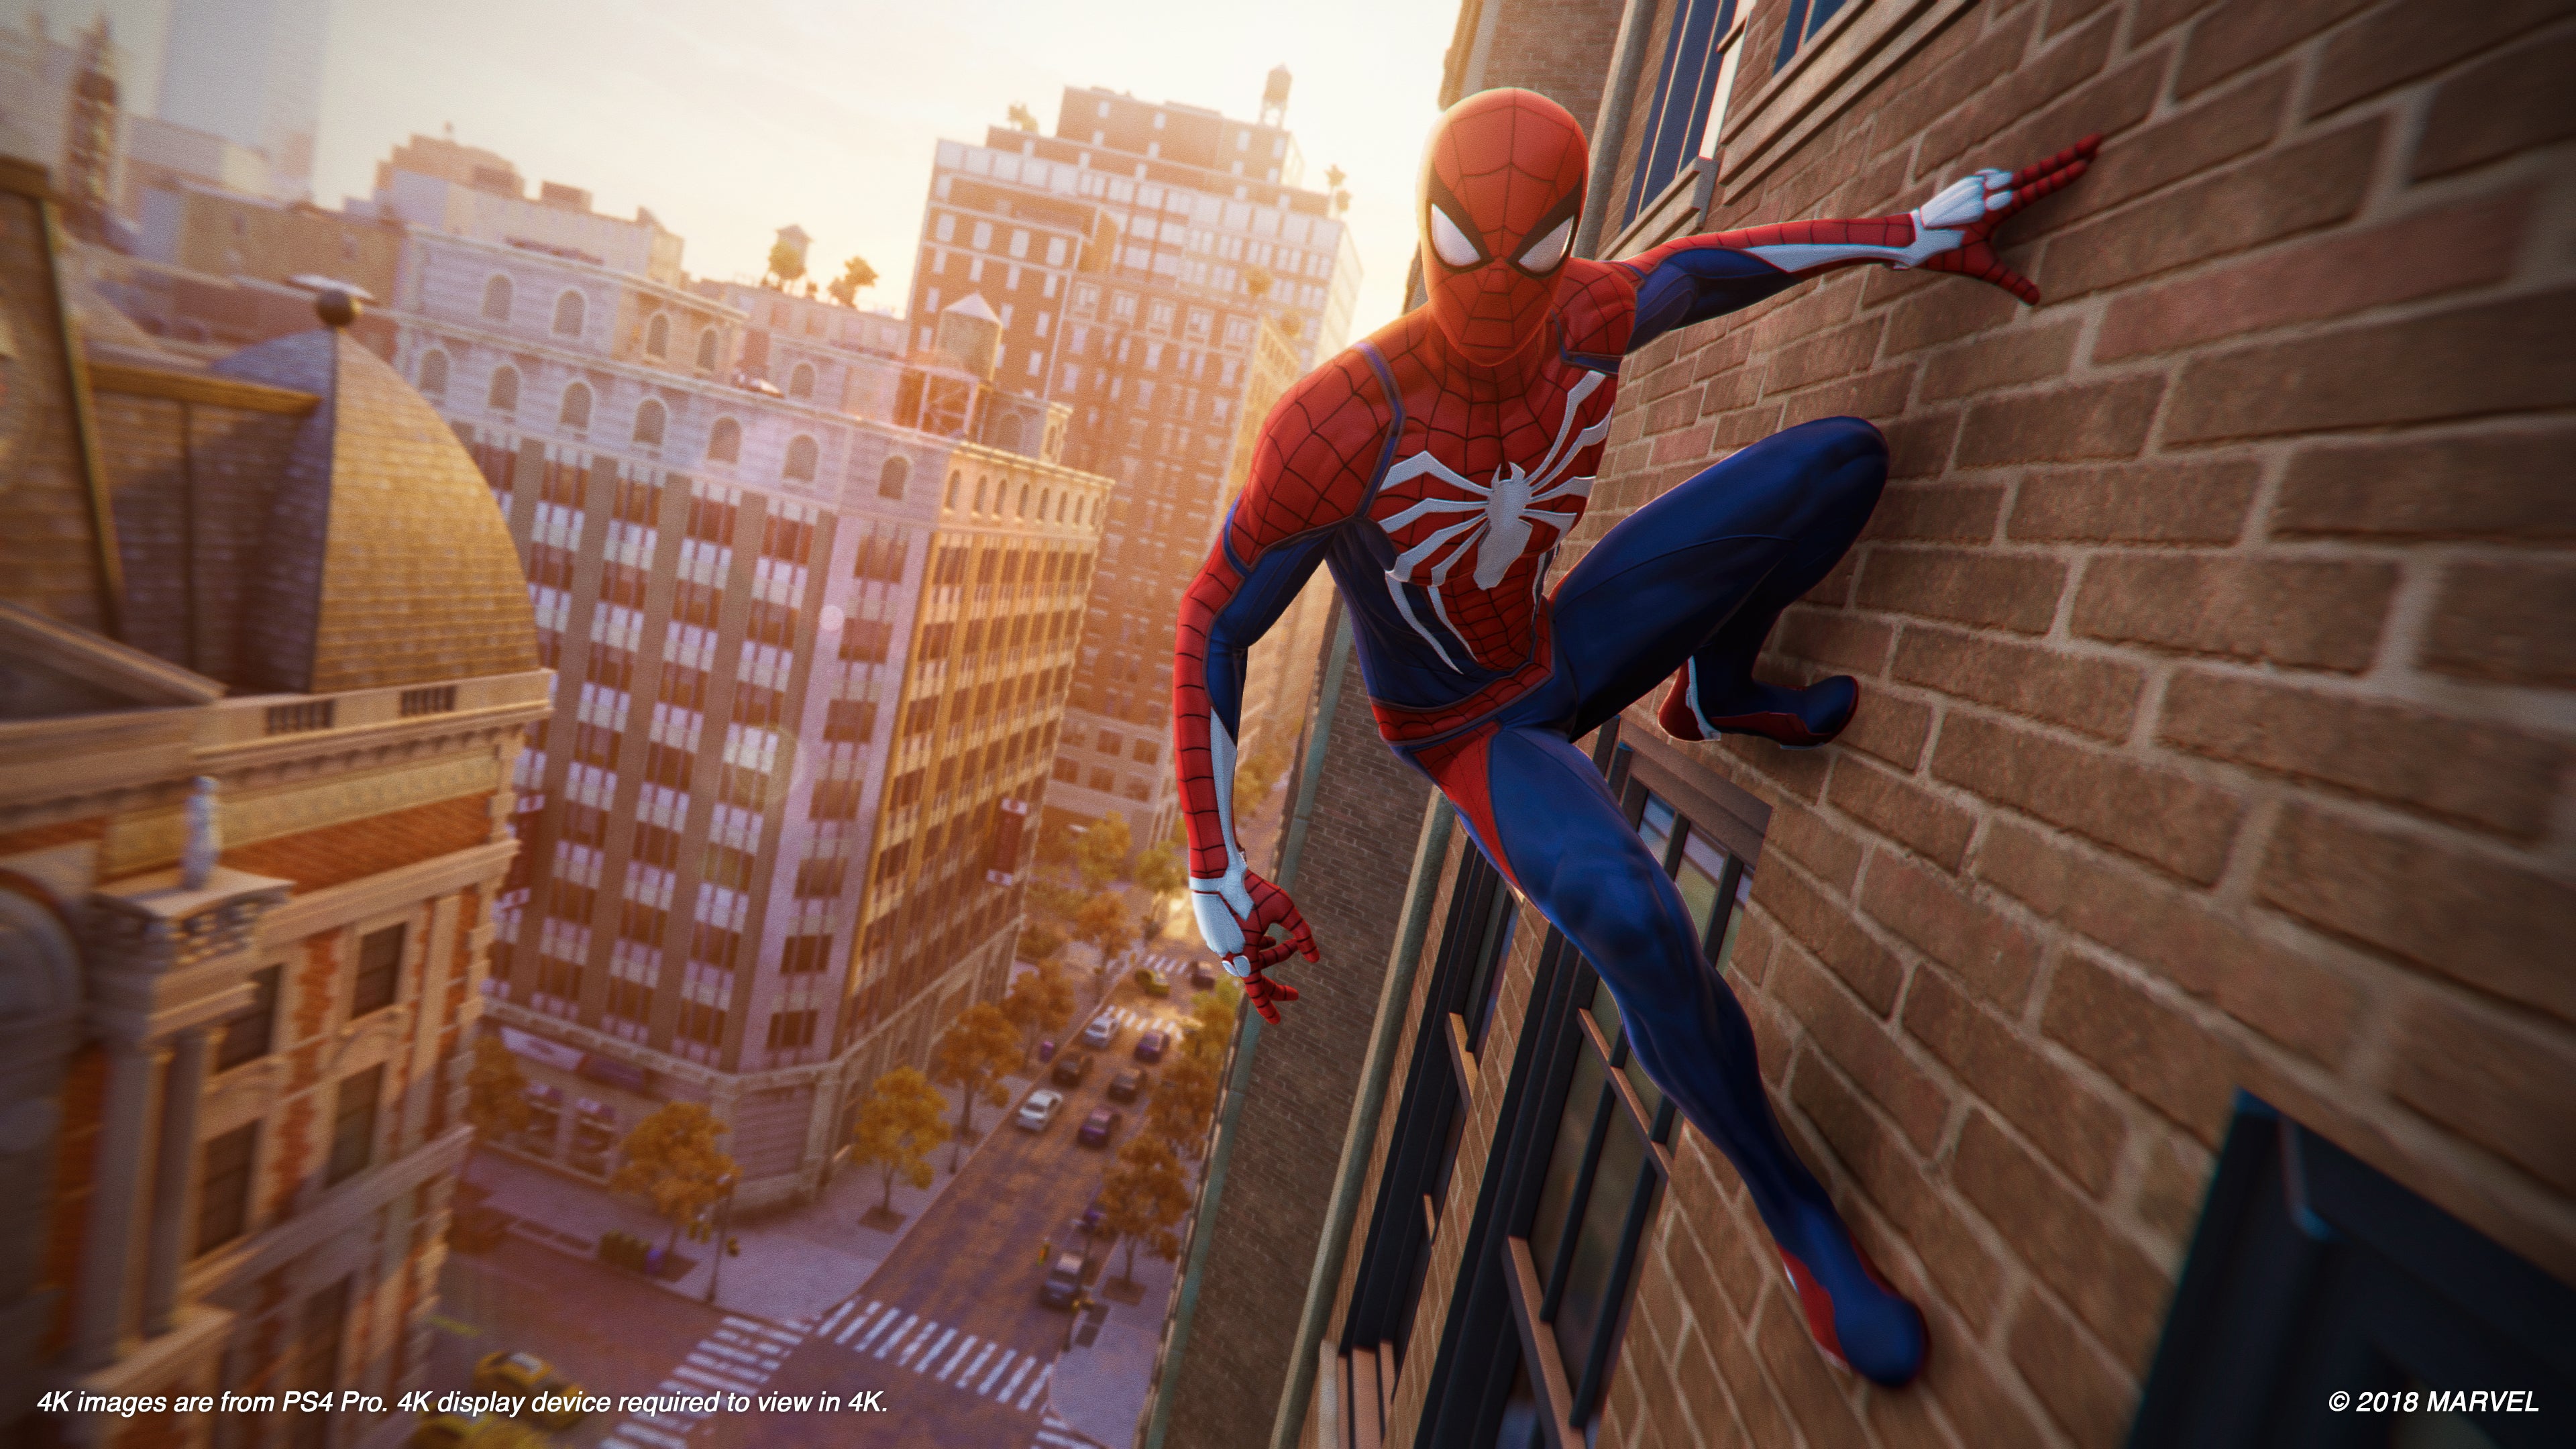 Image for This week’s best gaming deals: Spider-Man, Google Pixel 2 XL, and more